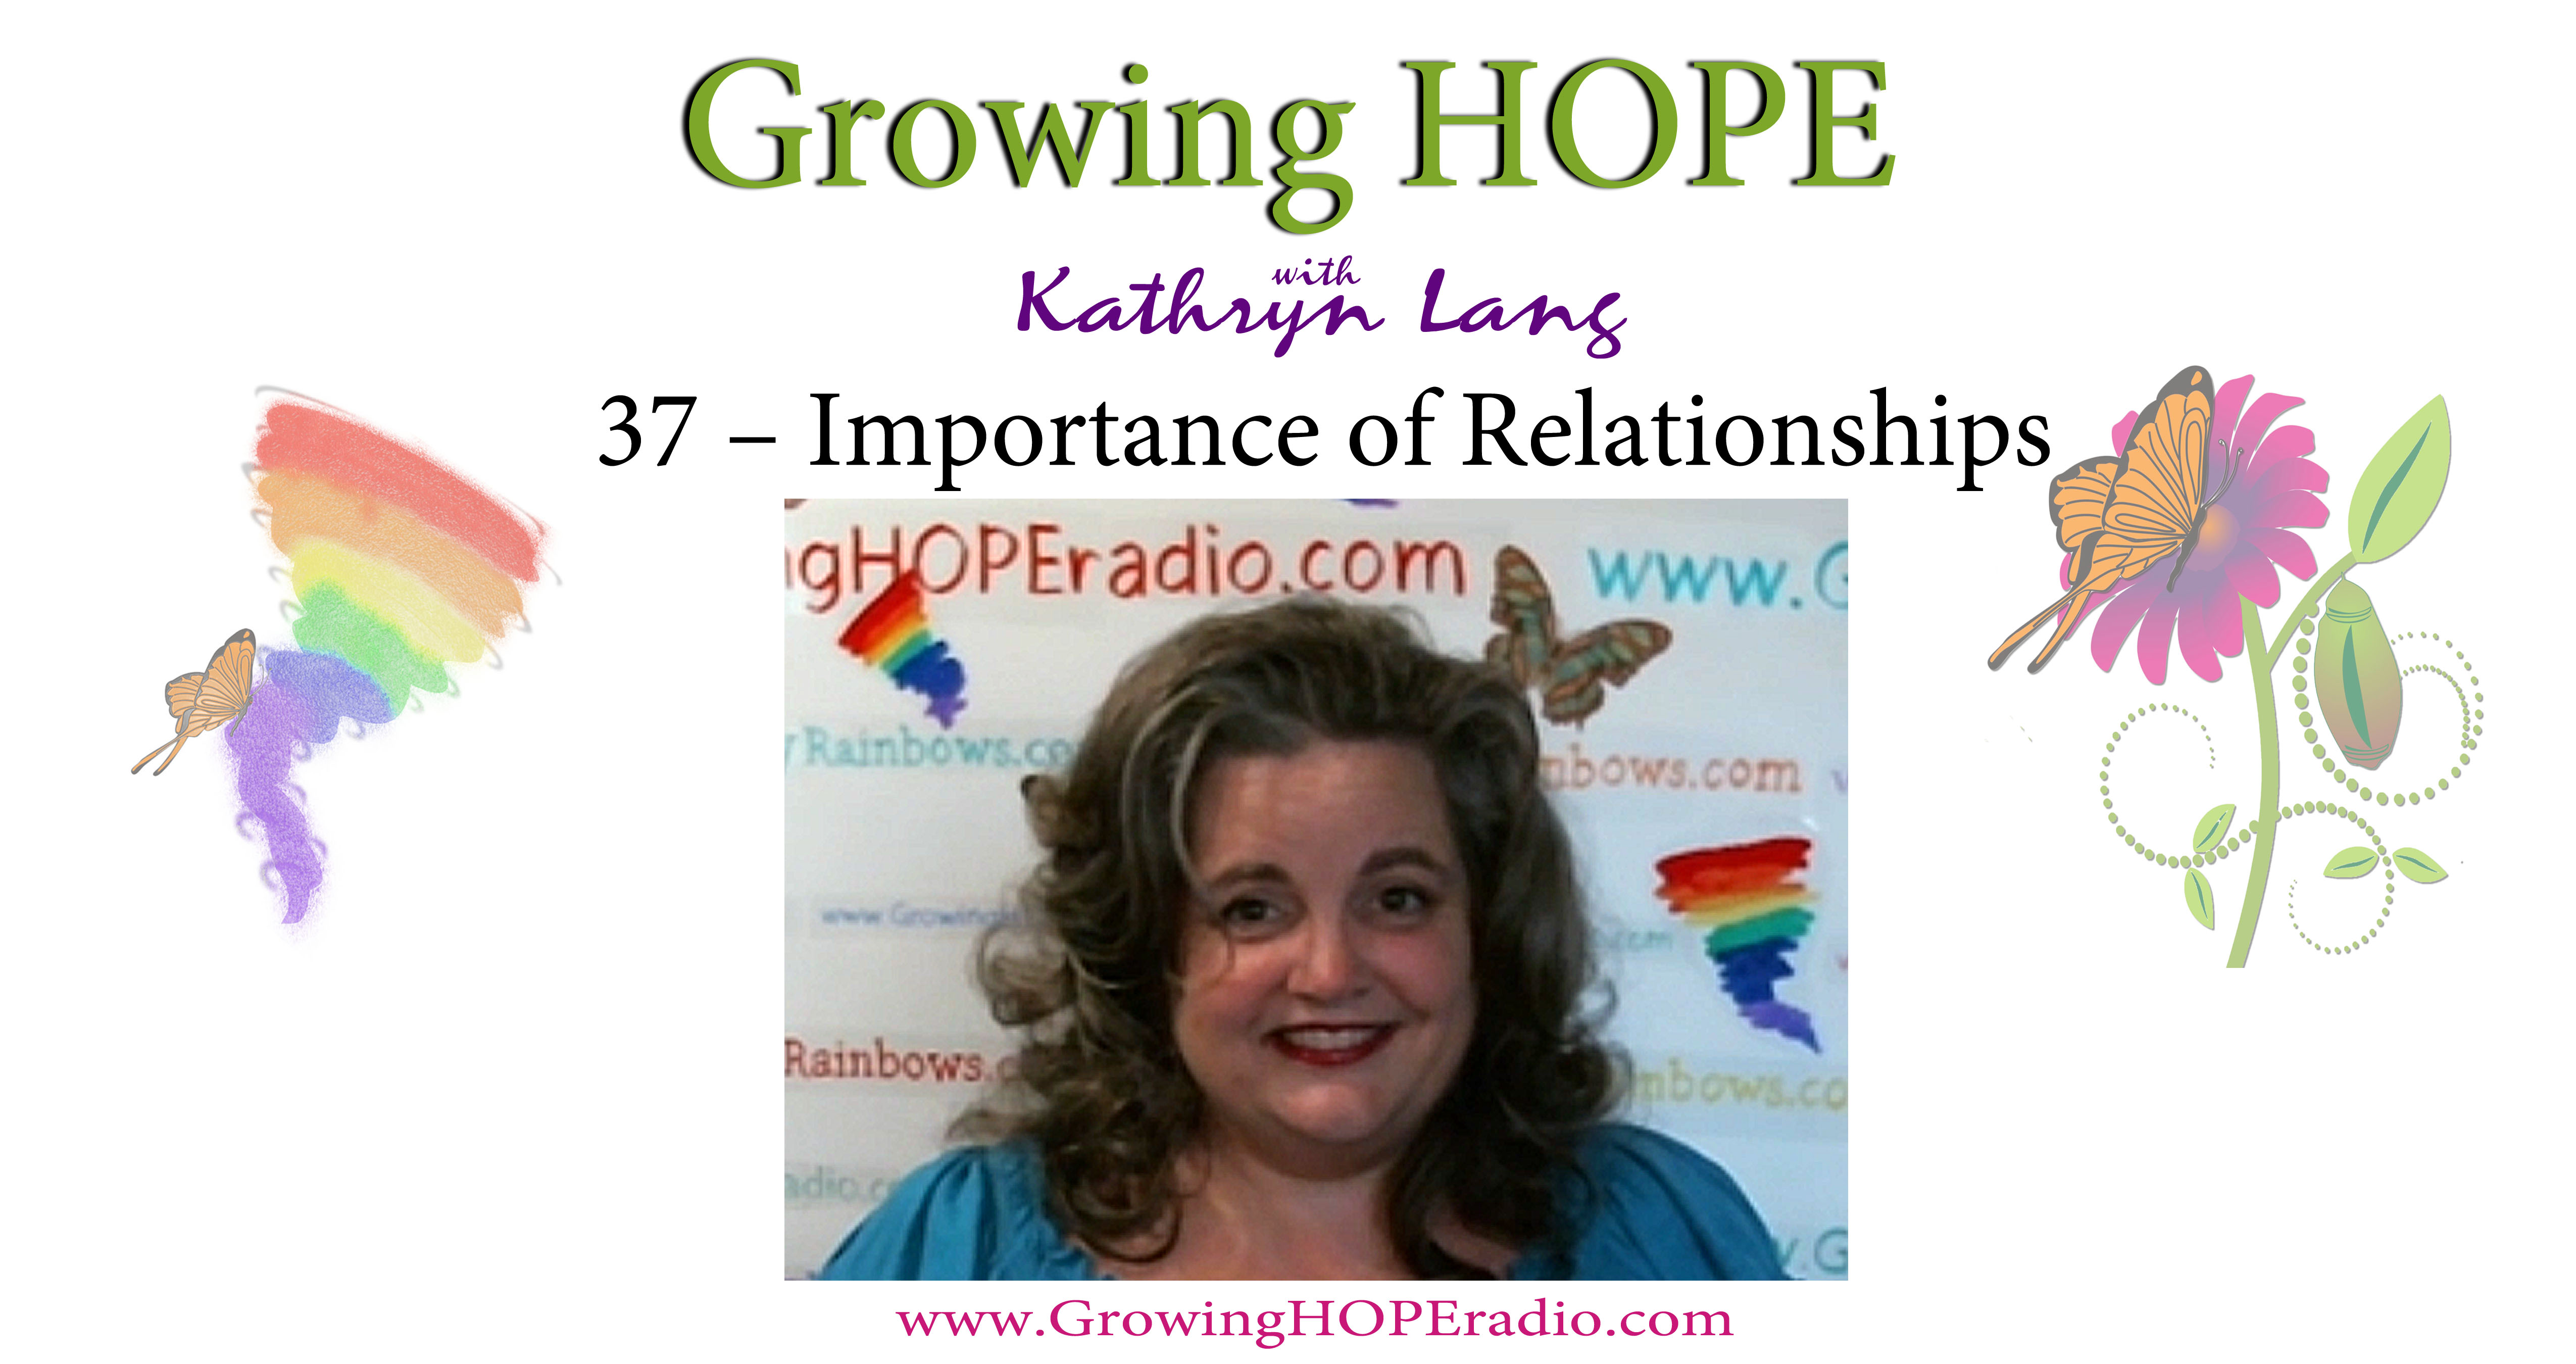 Growing HOPE Daily - 37 - Importance of Relationships